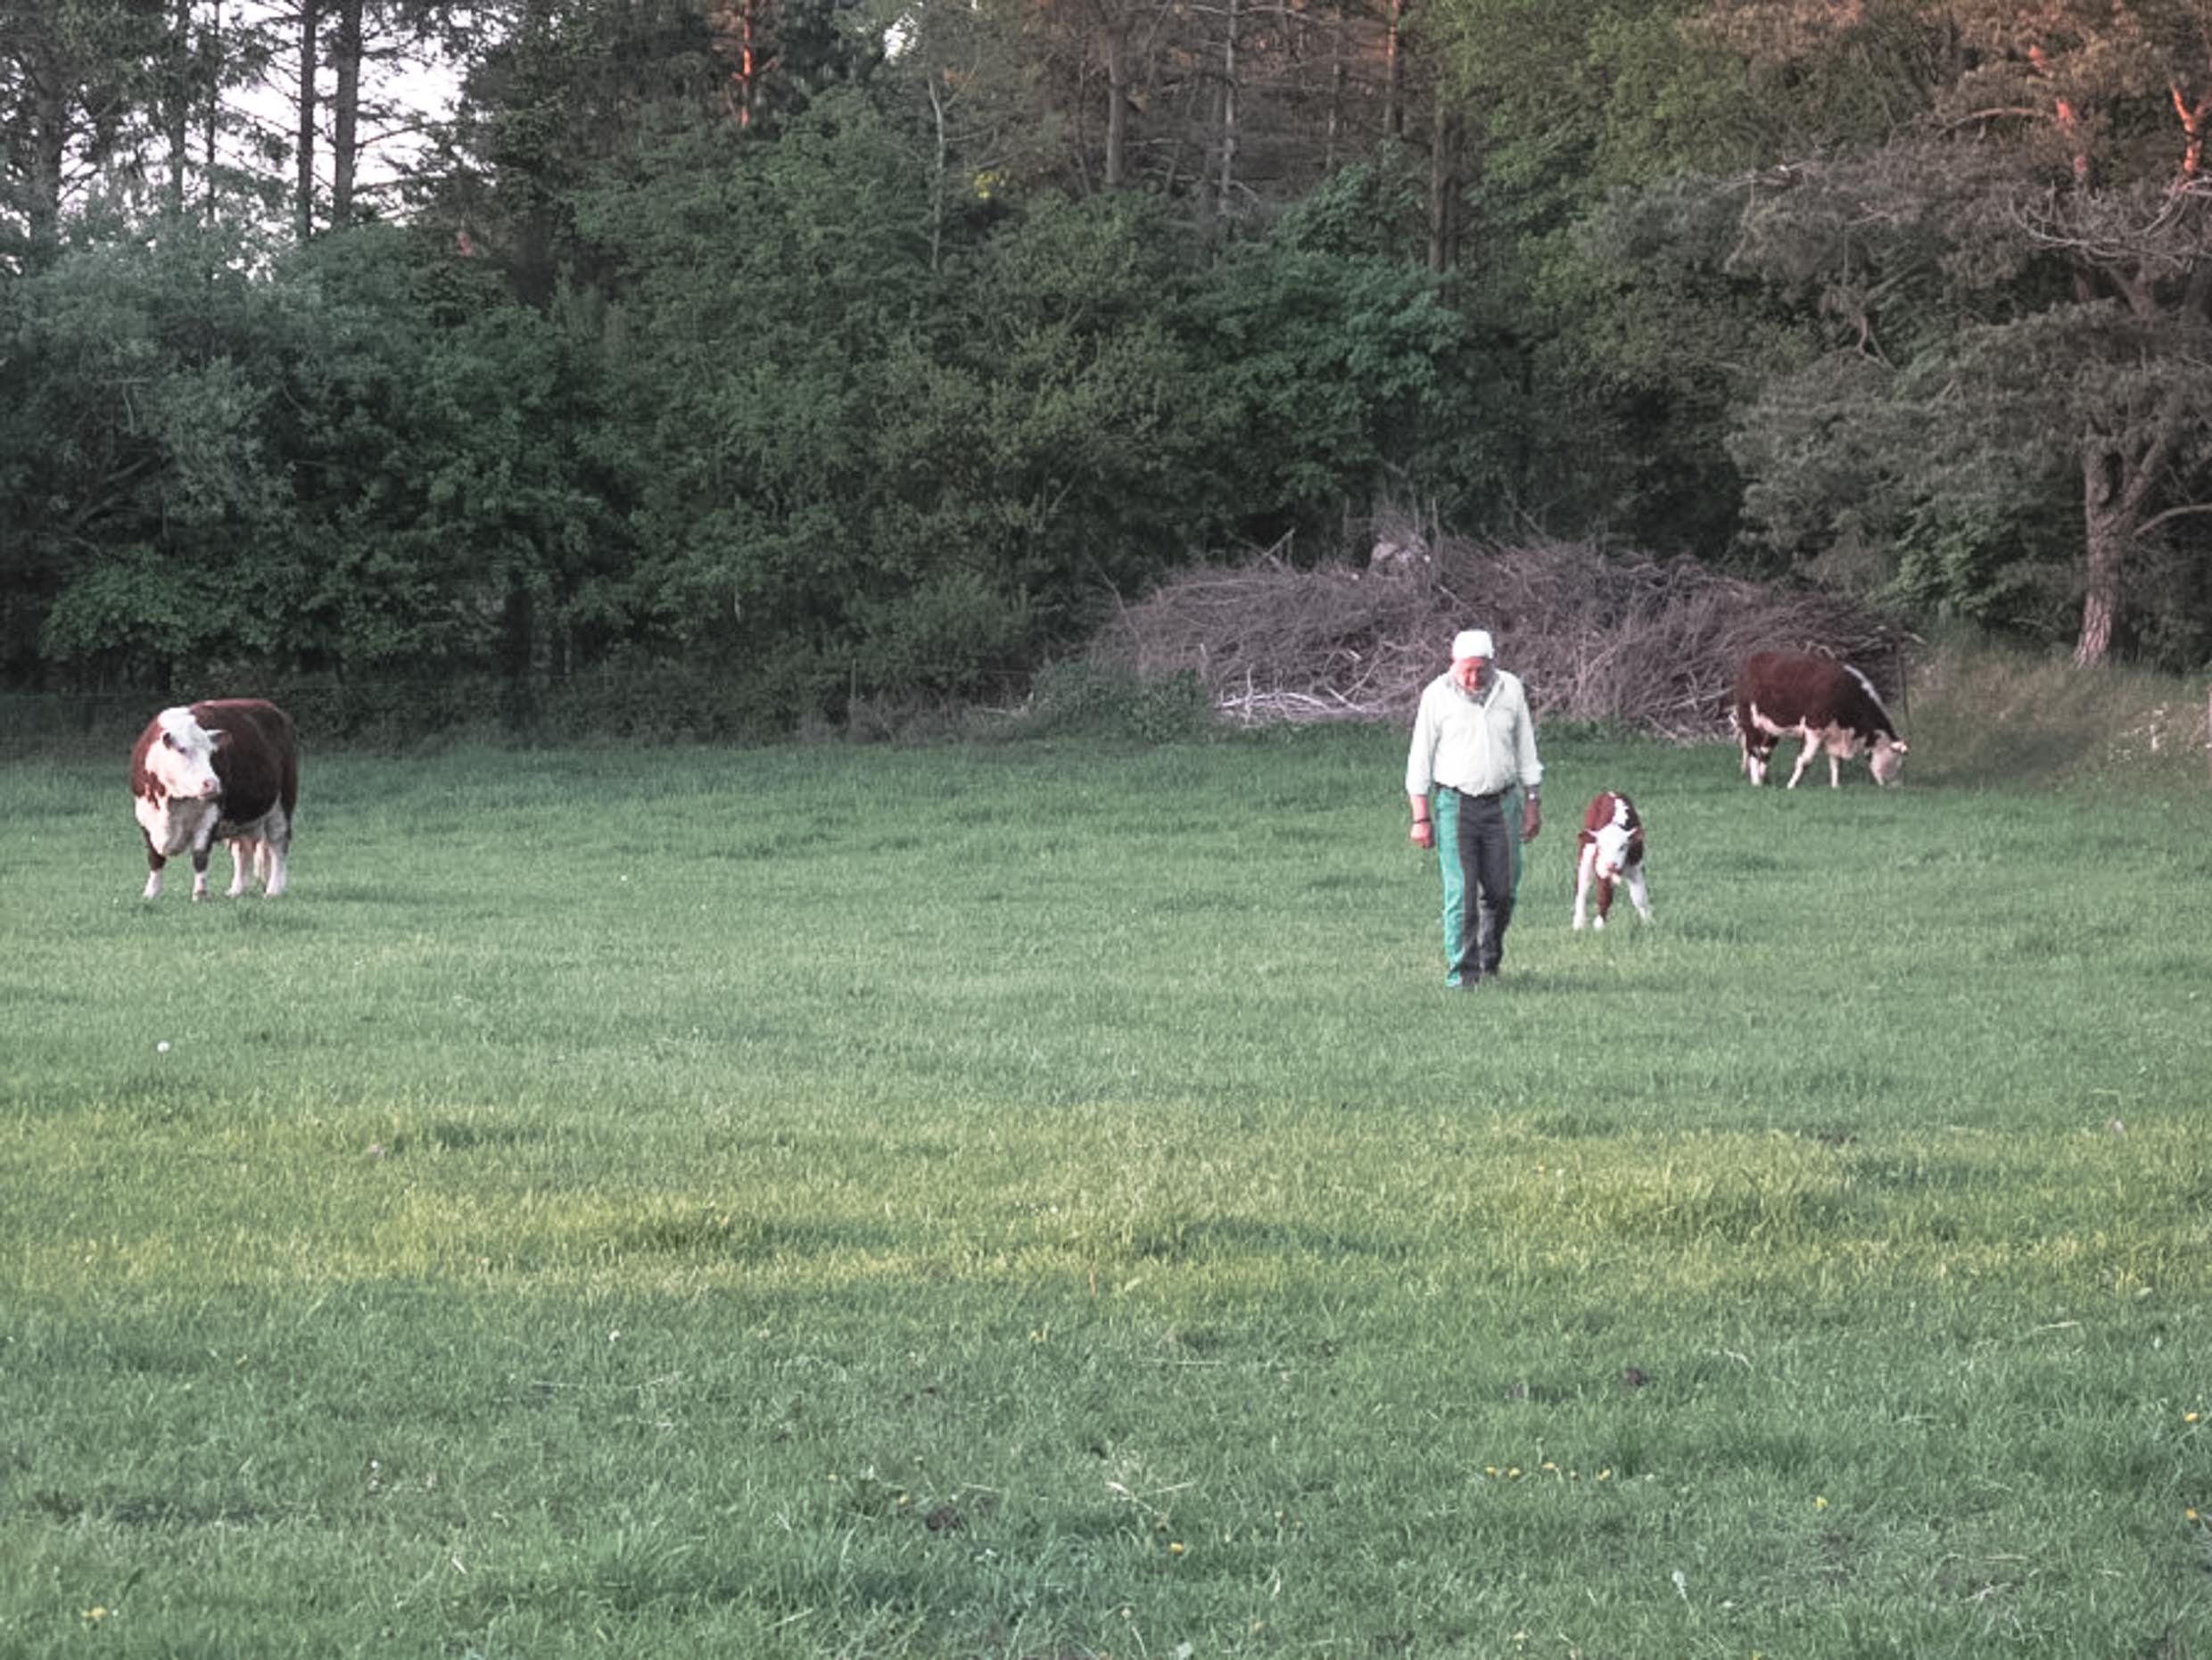 A man with green pants and a white shirt walking on a green field with two cows and a calf.